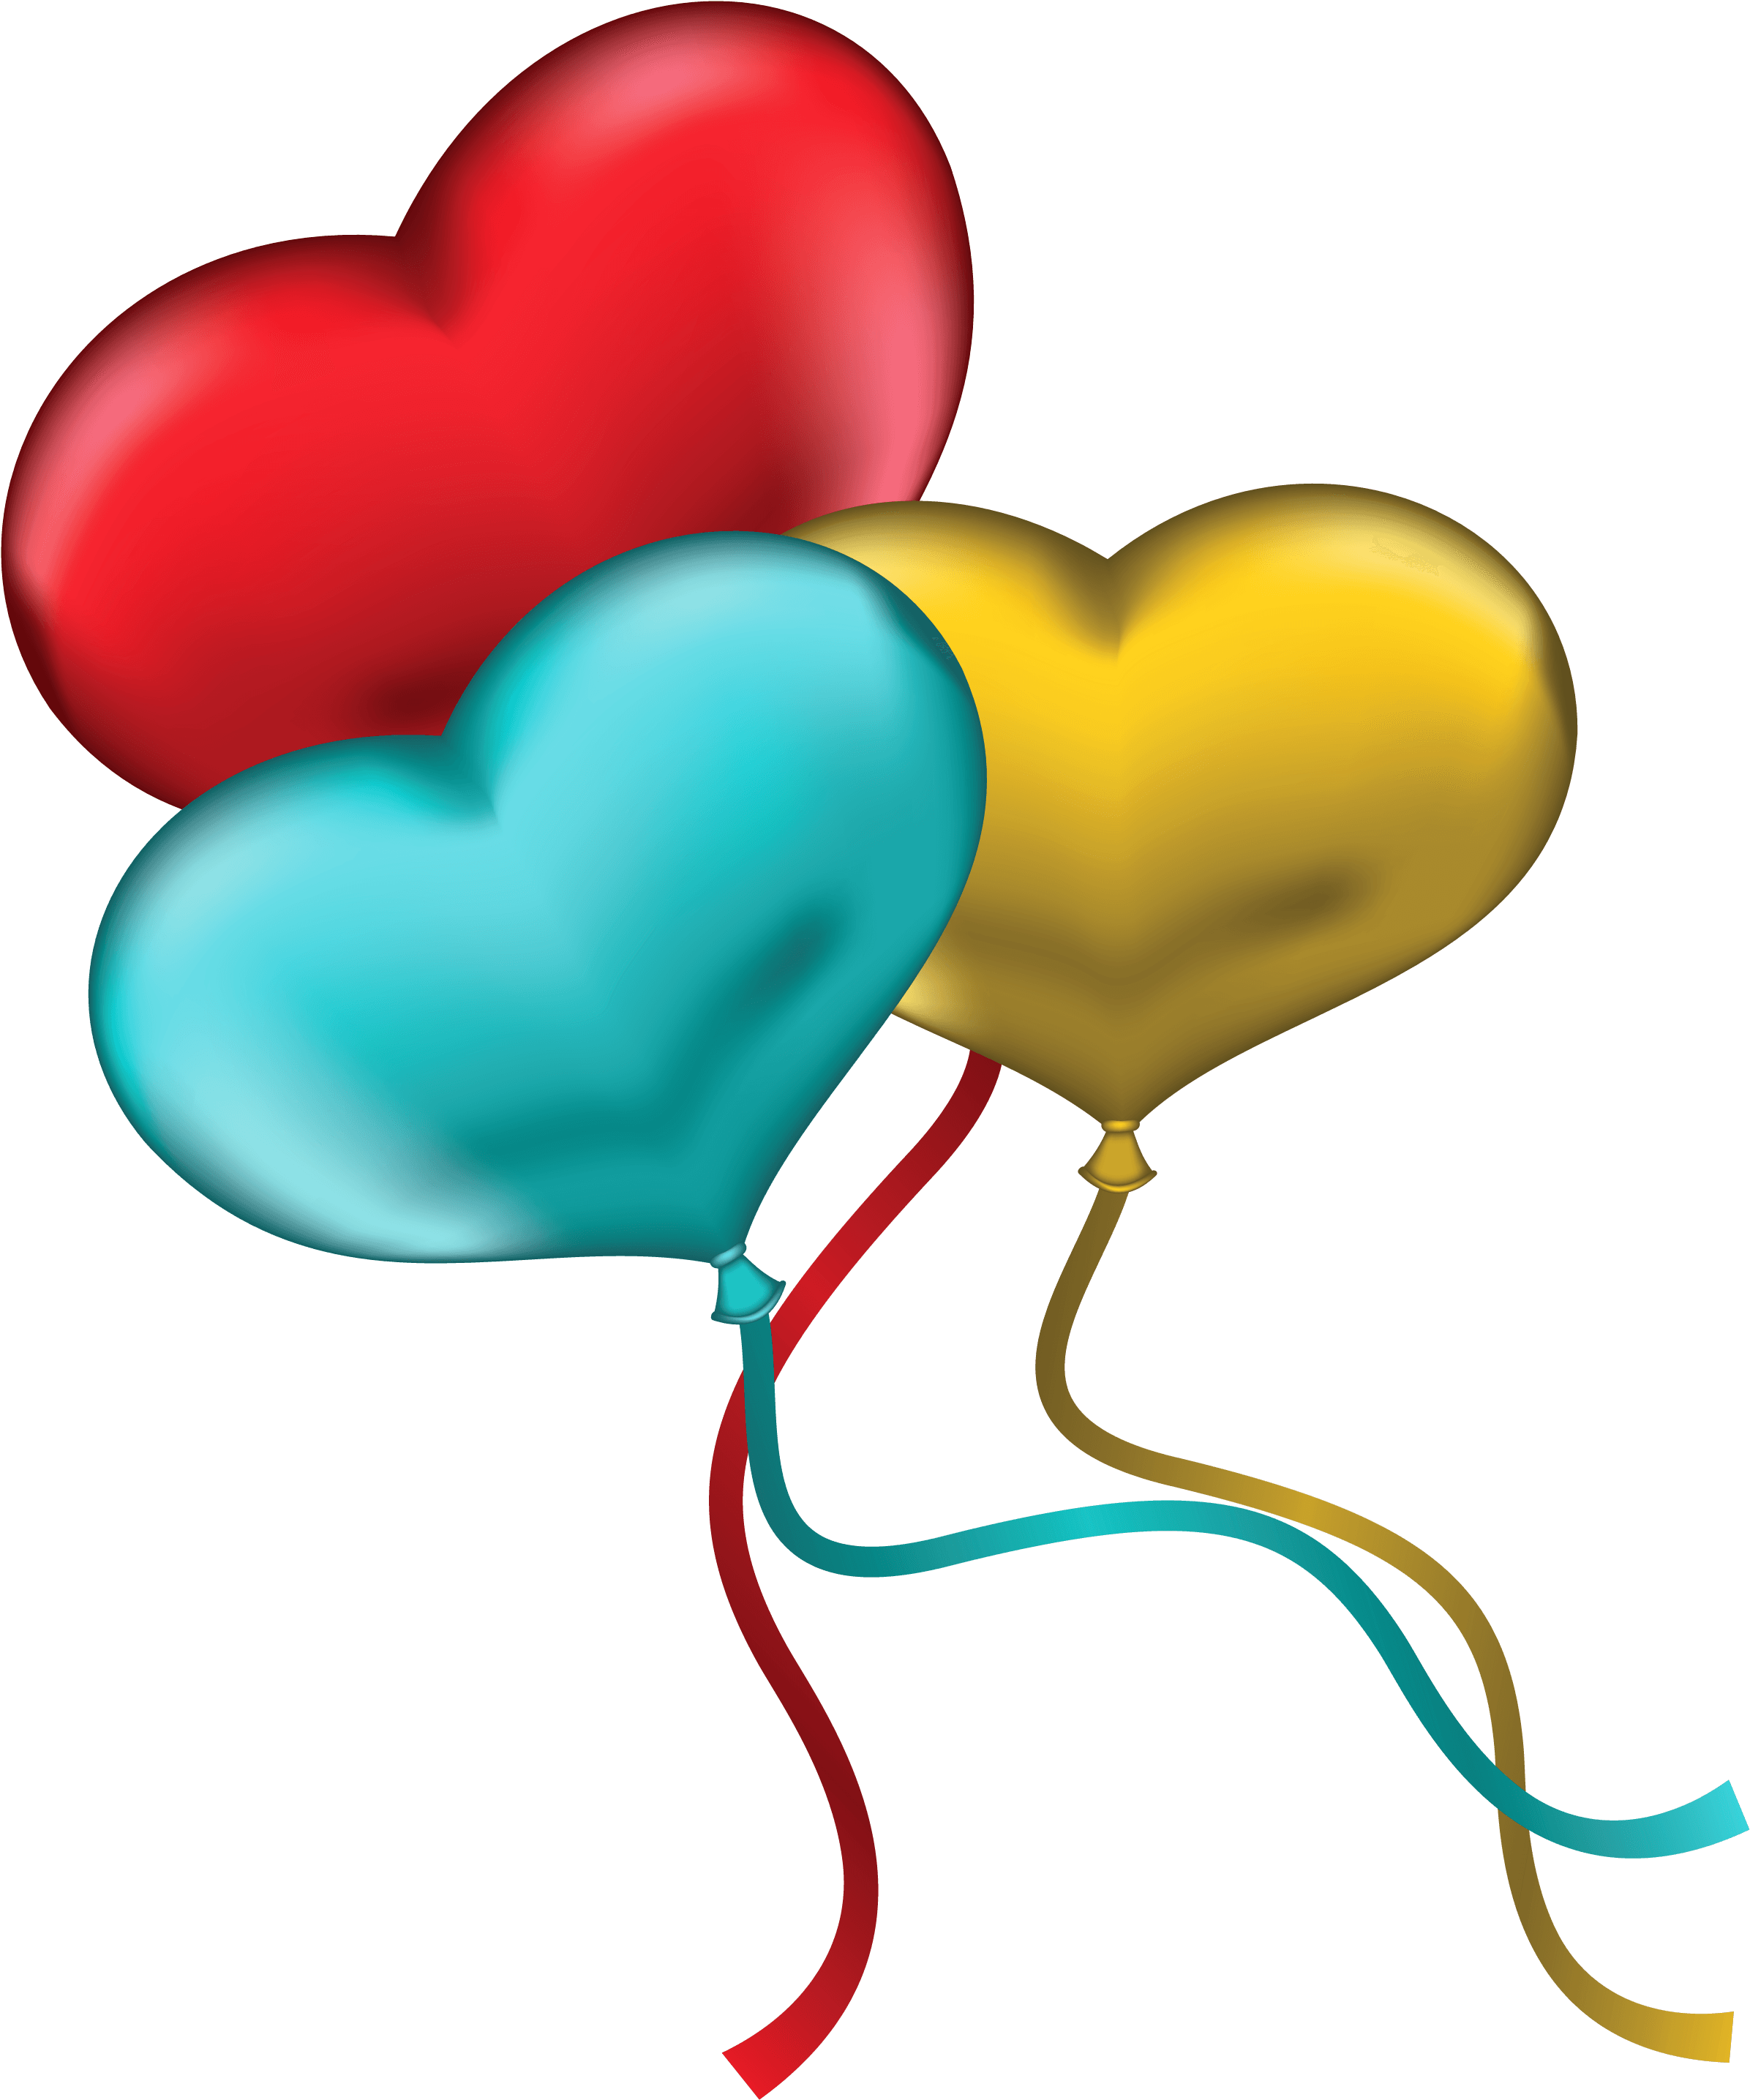 A Group Of Balloons In The Shape Of A Heart